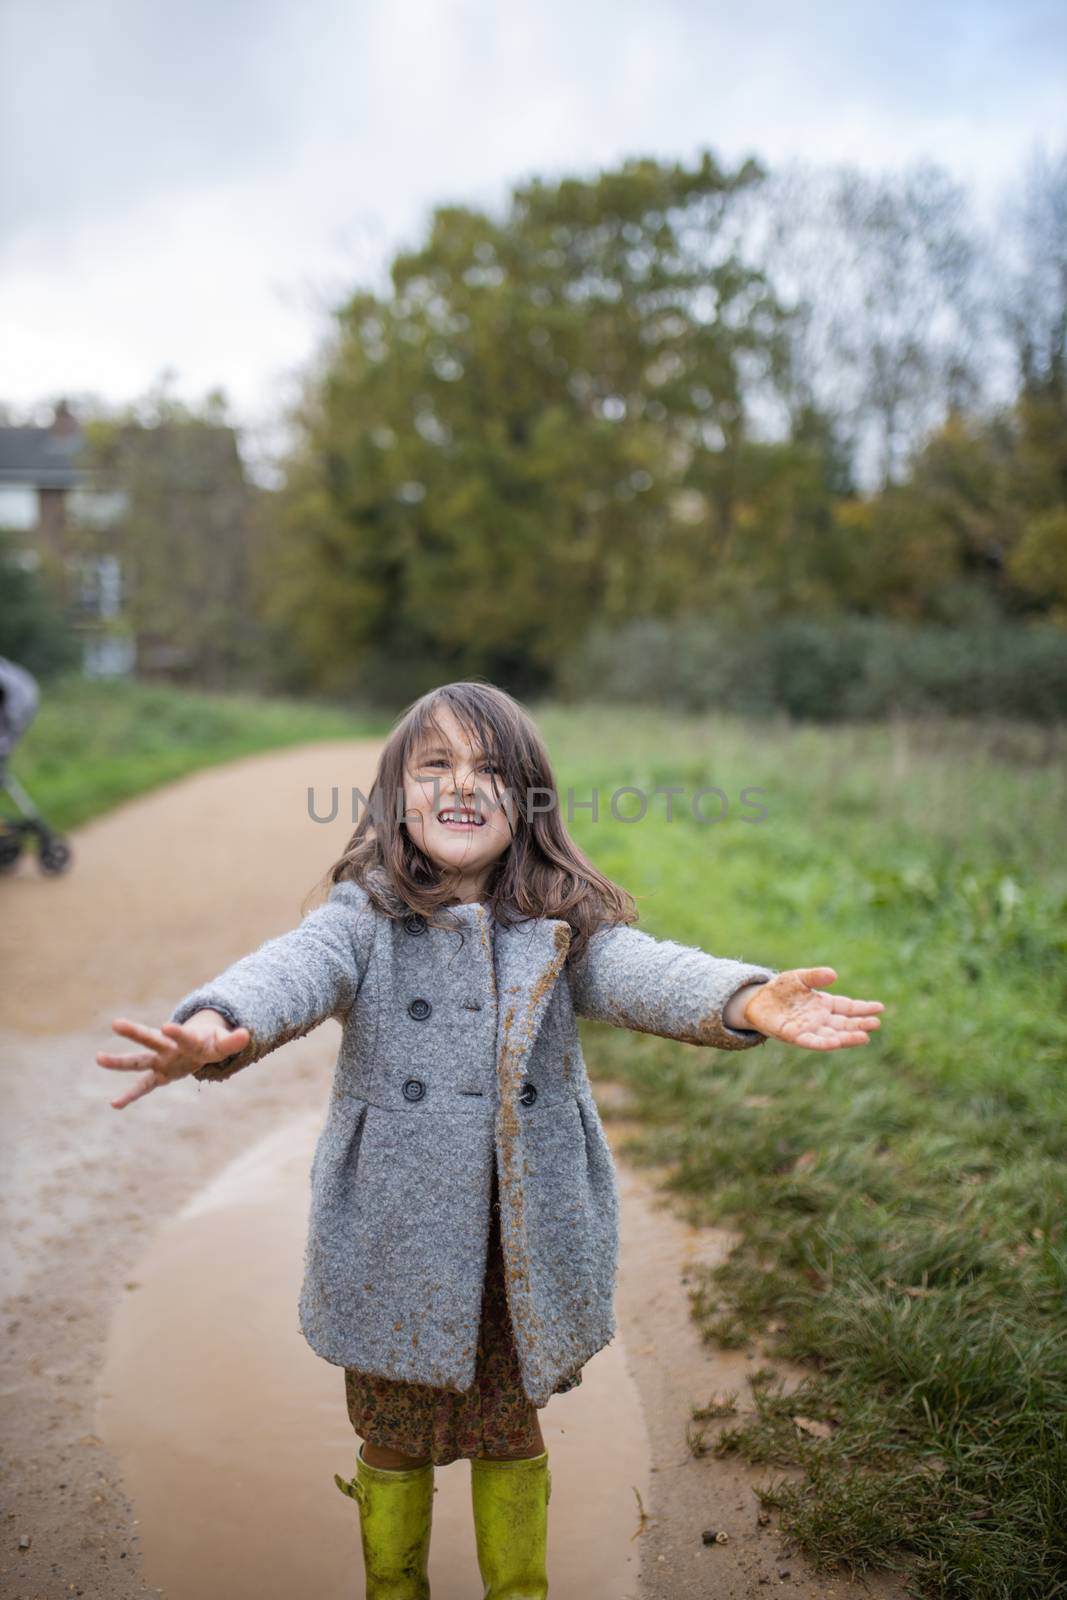 Happy and adorable little girl smiling after jumping in a muddy puddle. Young child having fun and getting dirty in puddles. Kids playing outside